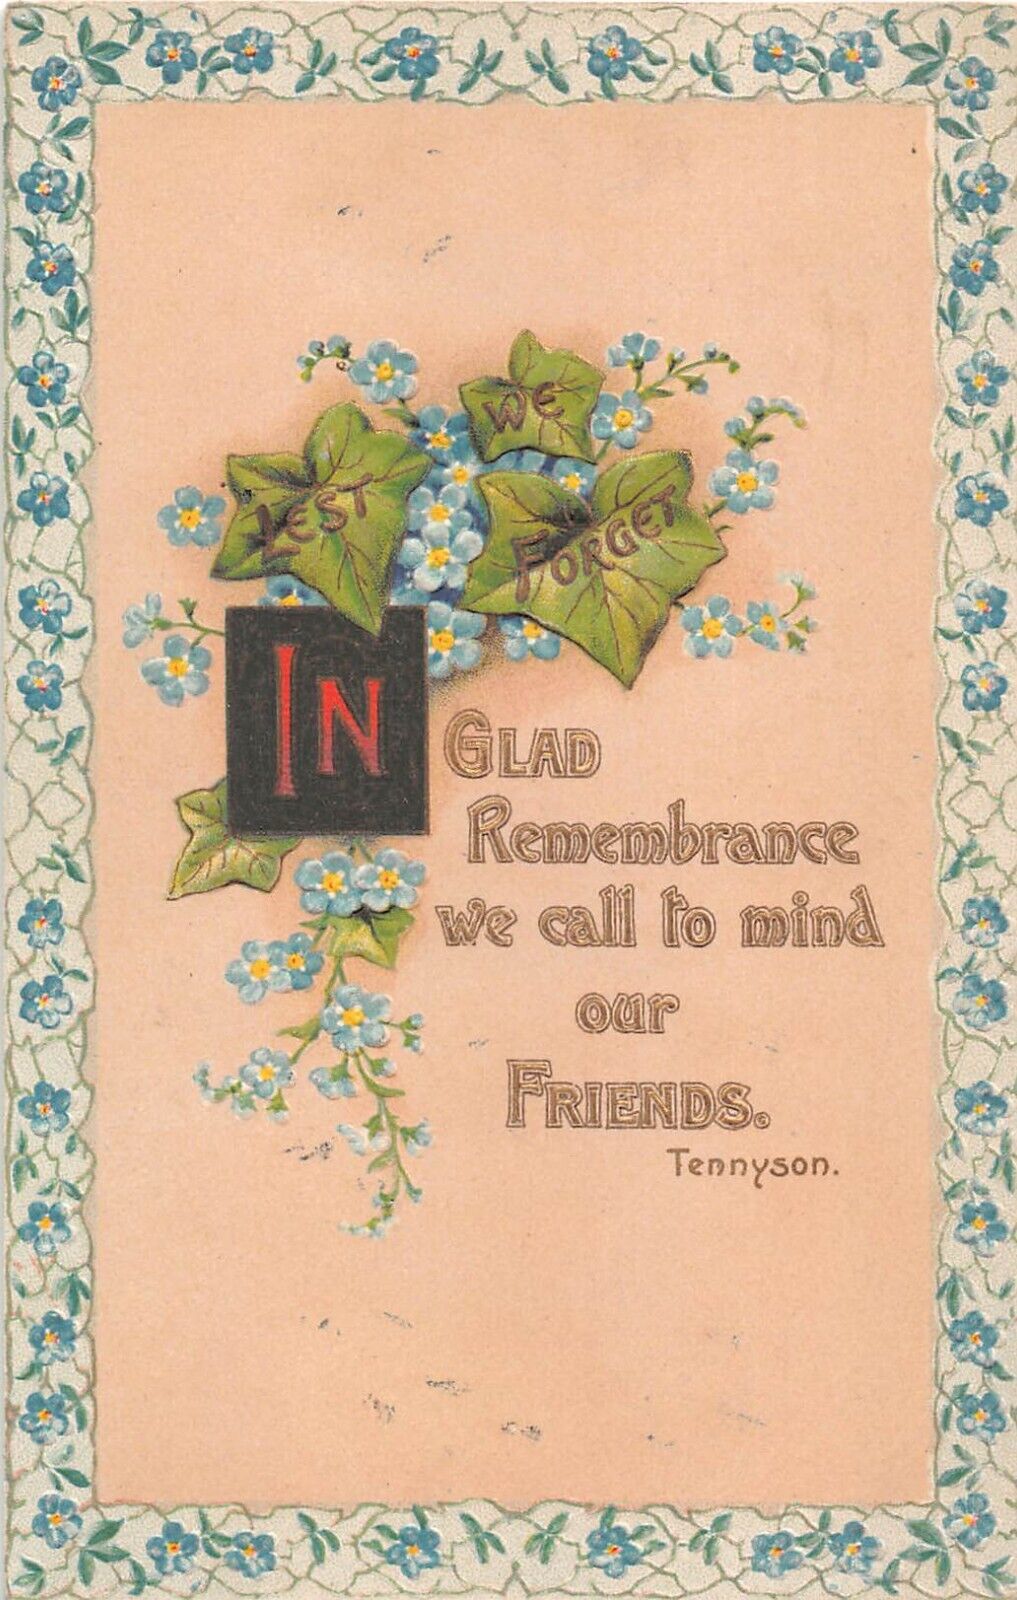 Forget-Me-Nots & Ivy by Friendship Quote by Tennyson - Old Postcard - No. 15878